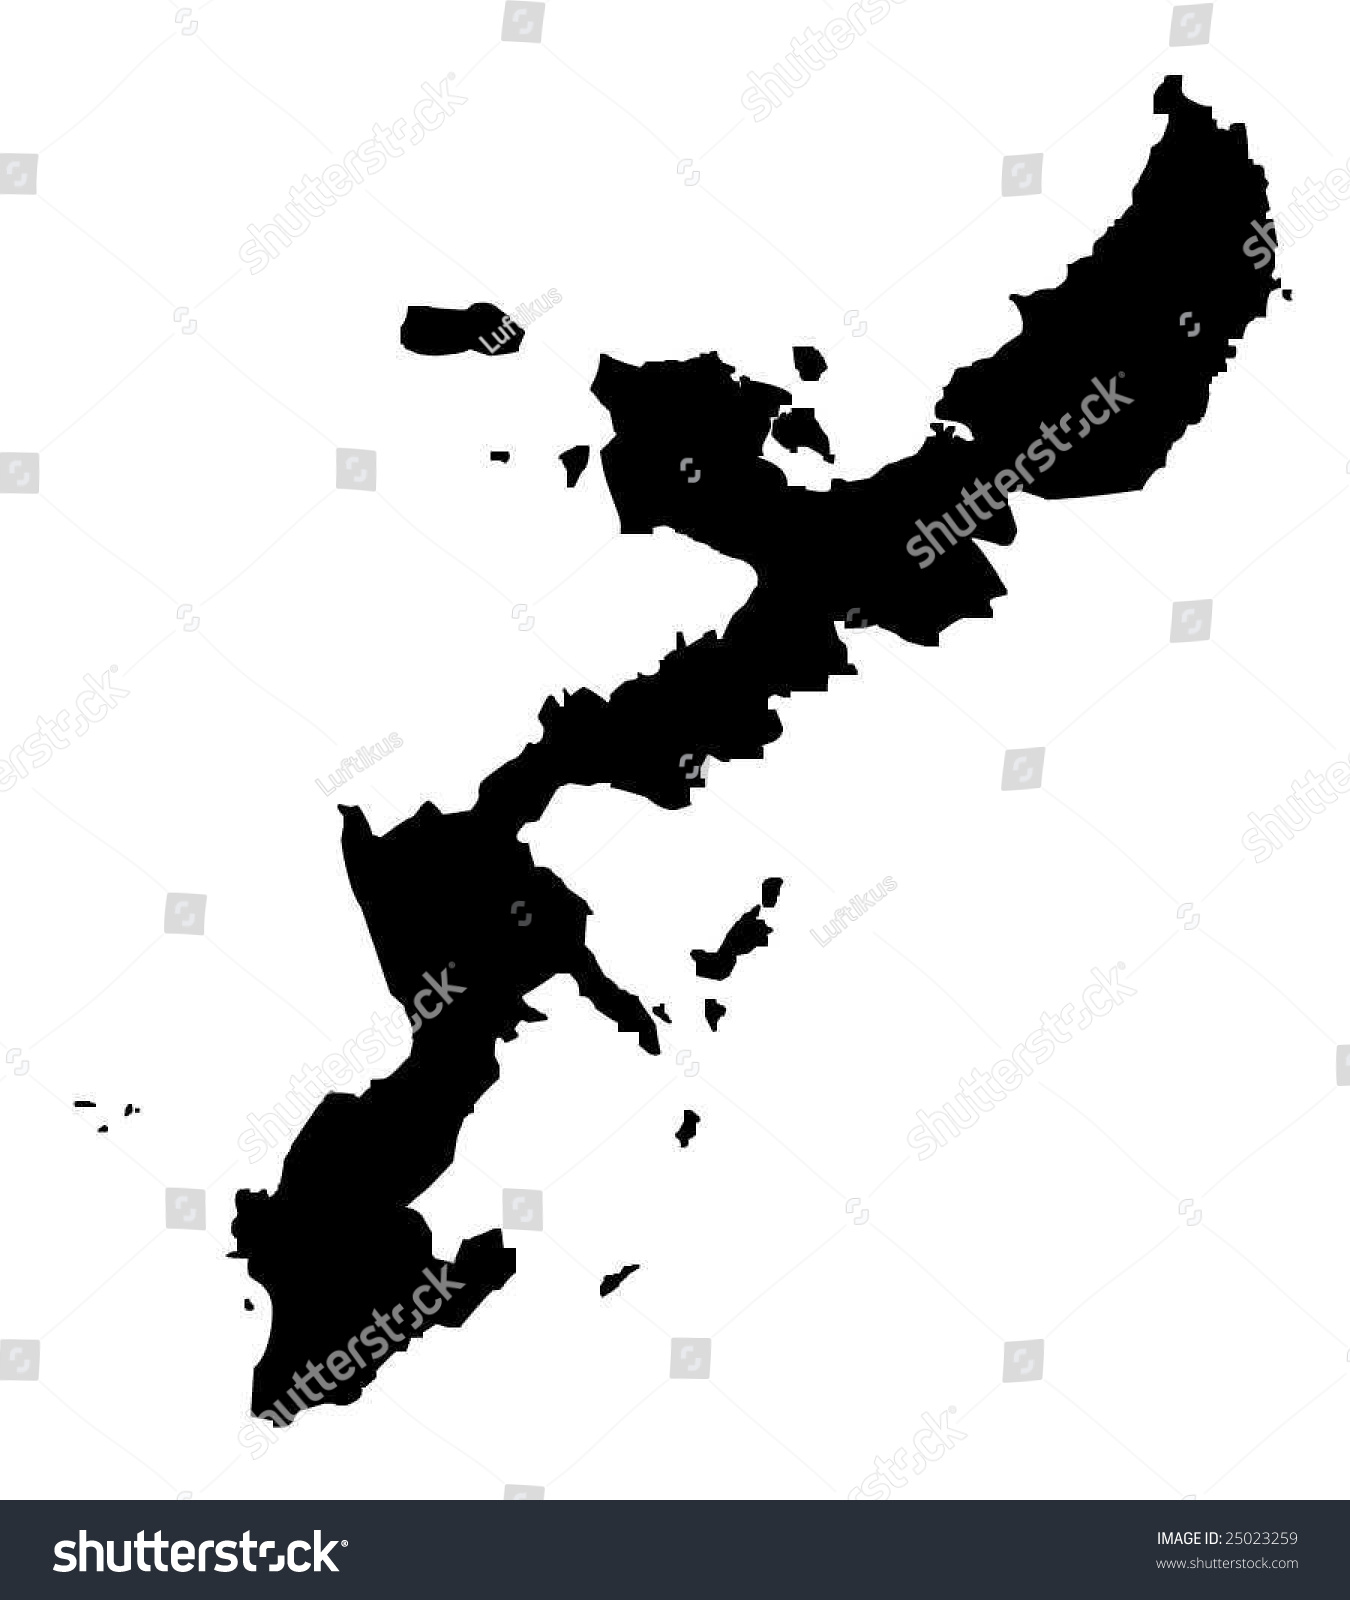 philippine map clipart black and white - photo #32